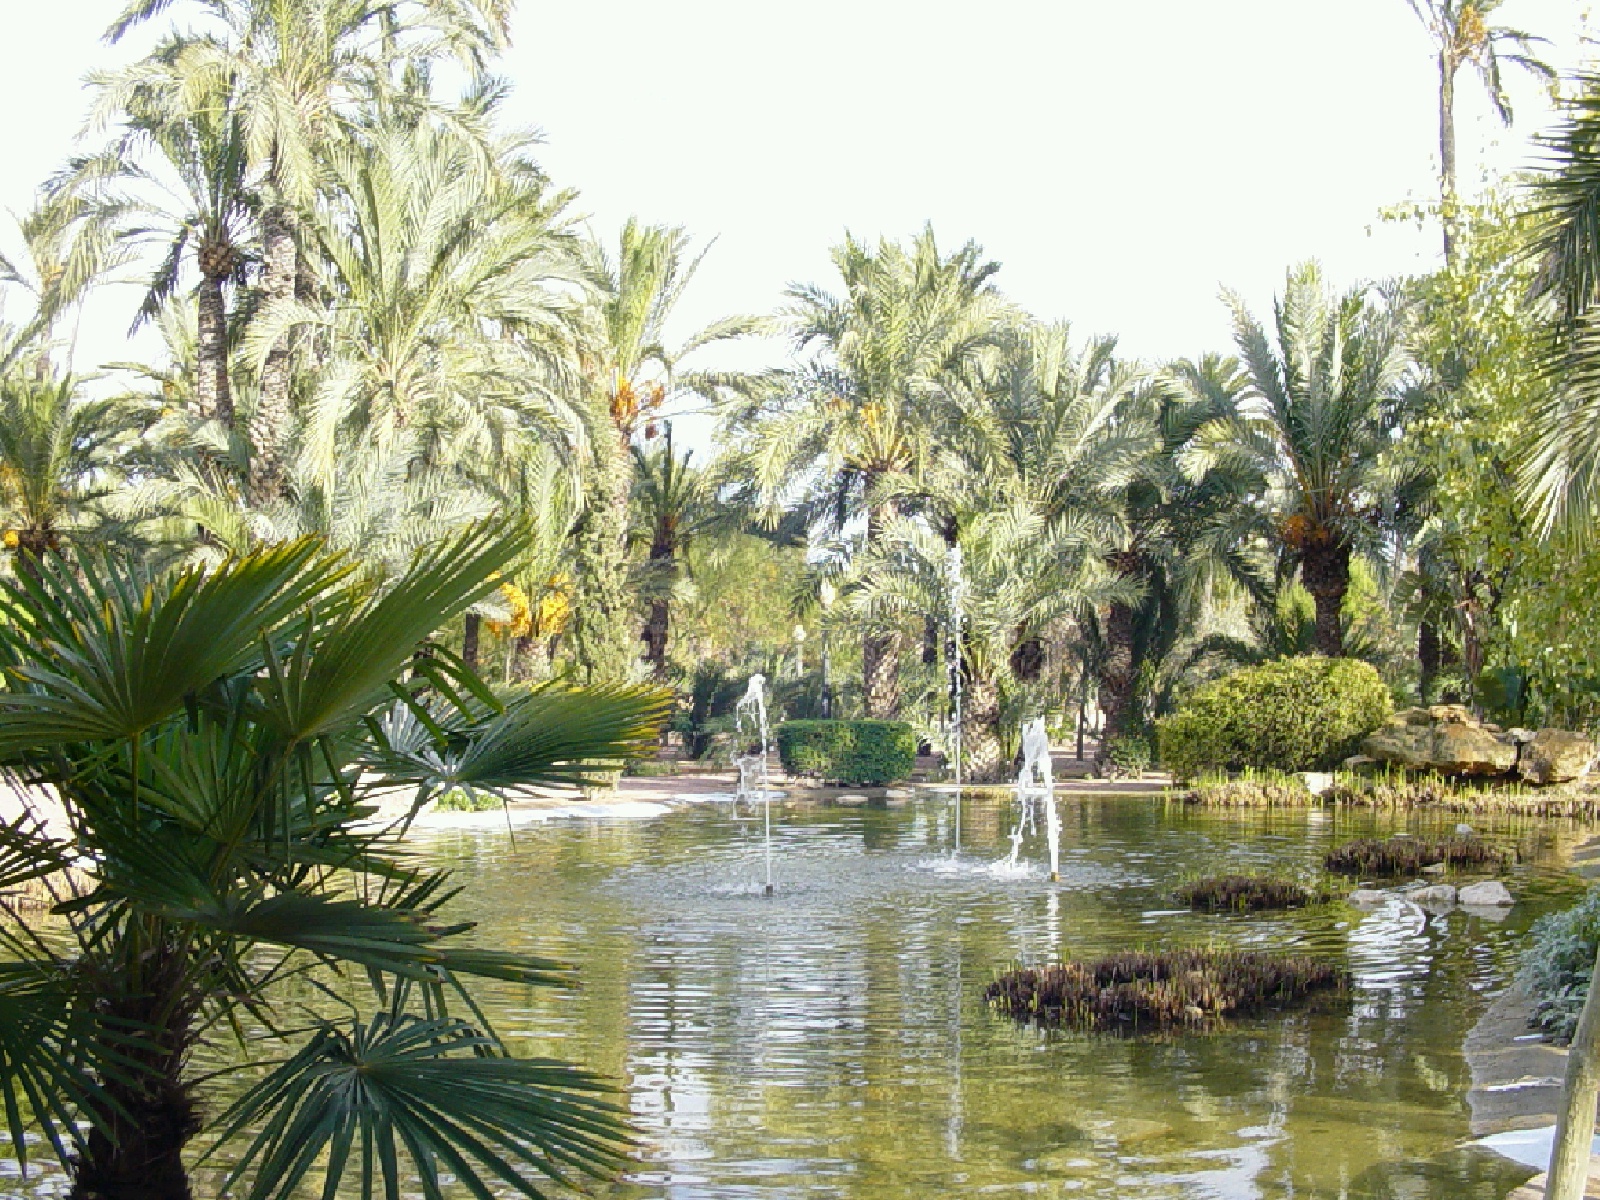 Postcards from Spain: Elche